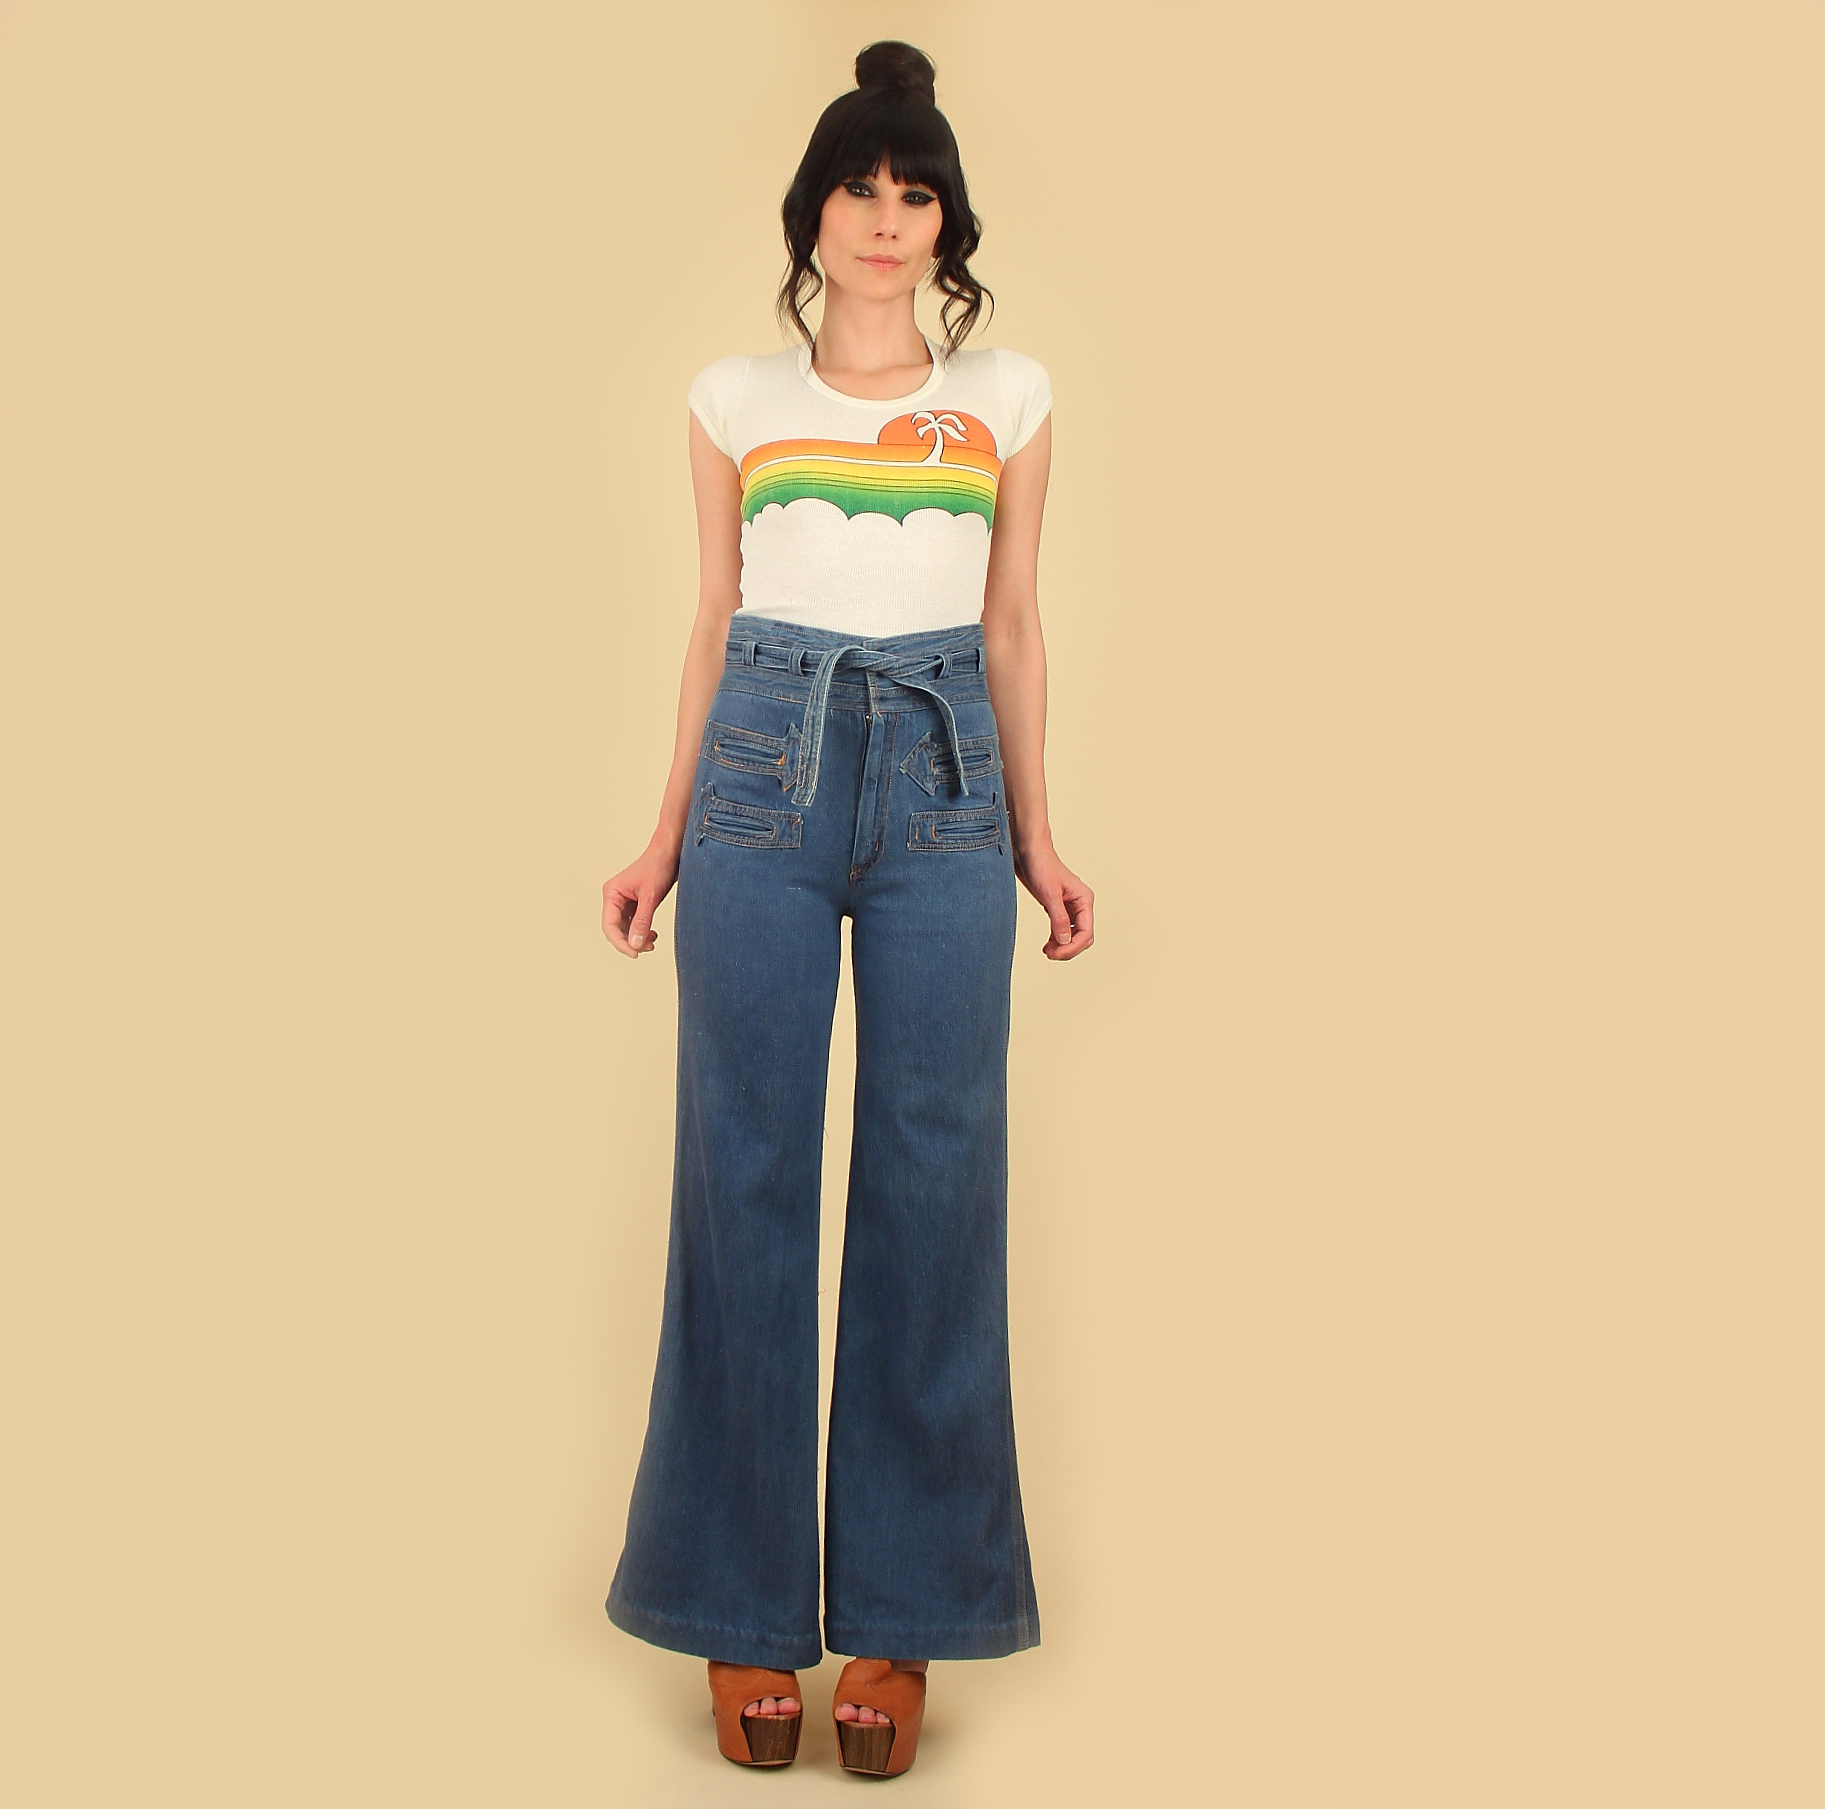 RARE Vintage 70's High Waisted BELL BOTTOM Jeans Nest Ce Pas? Glam ...